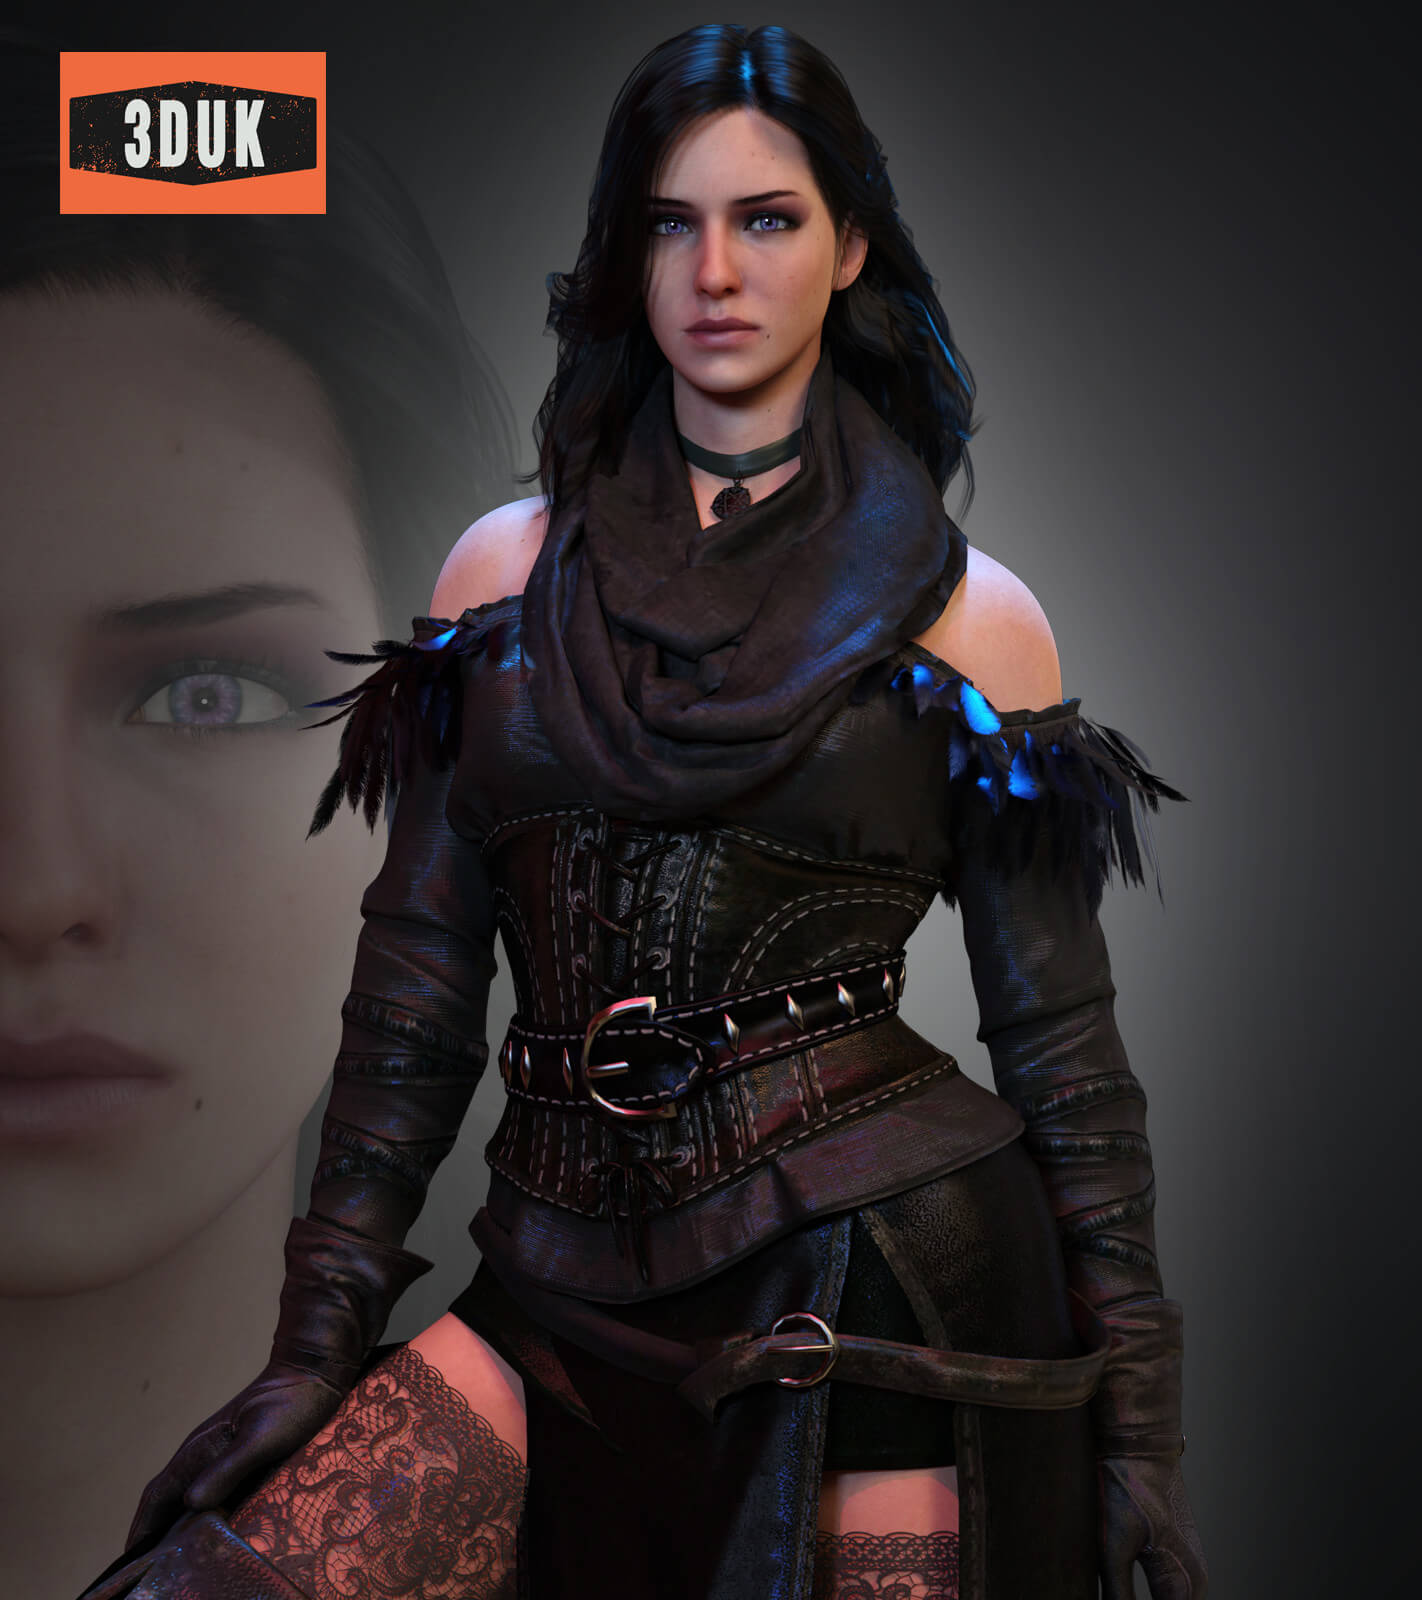 yennefer for g8f 0135056f4c122e5eac